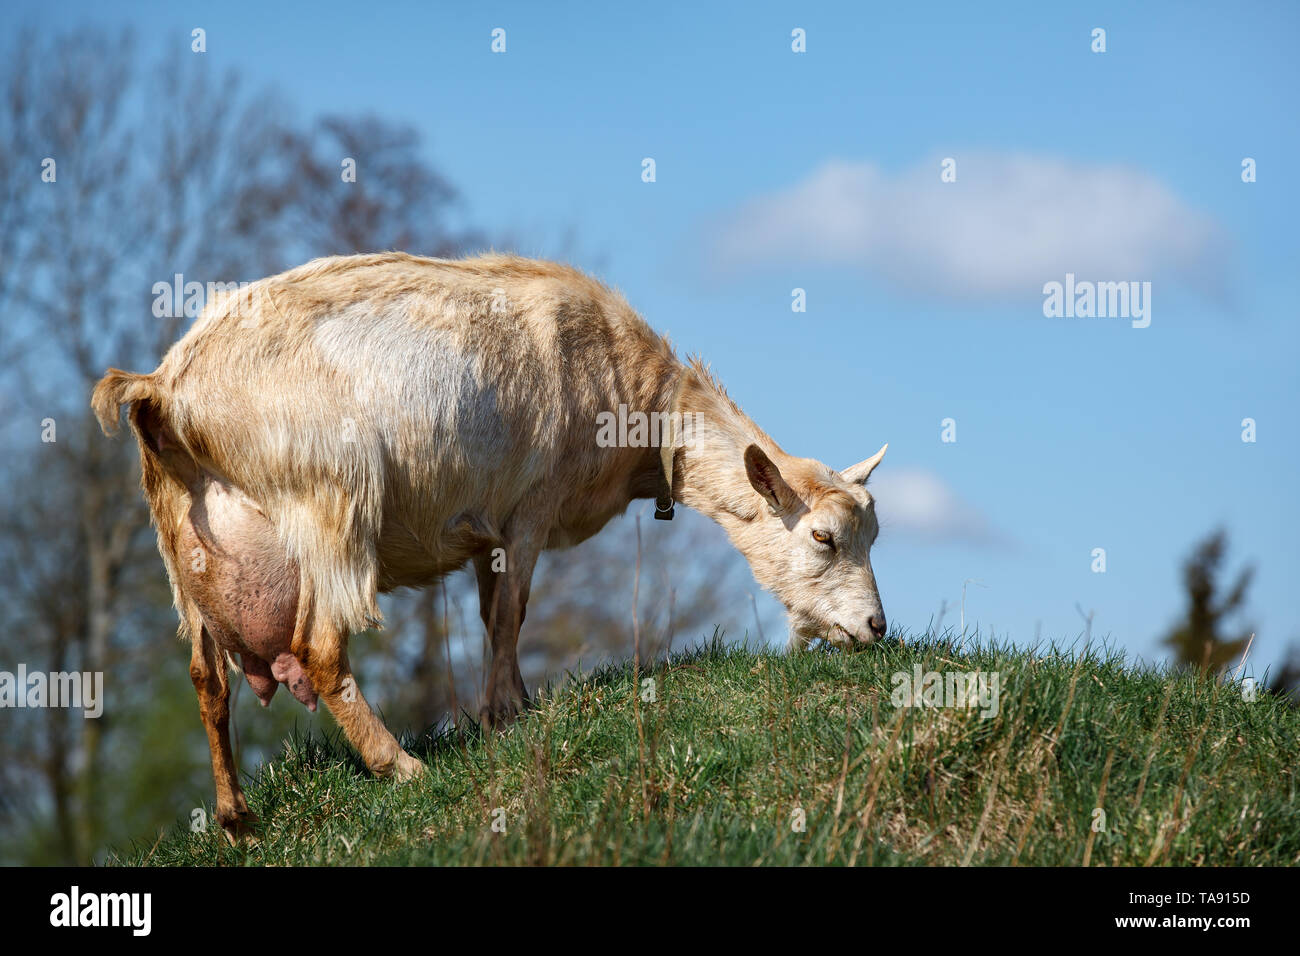 An old goat with a large udder eats a grass on a hill Stock Photo